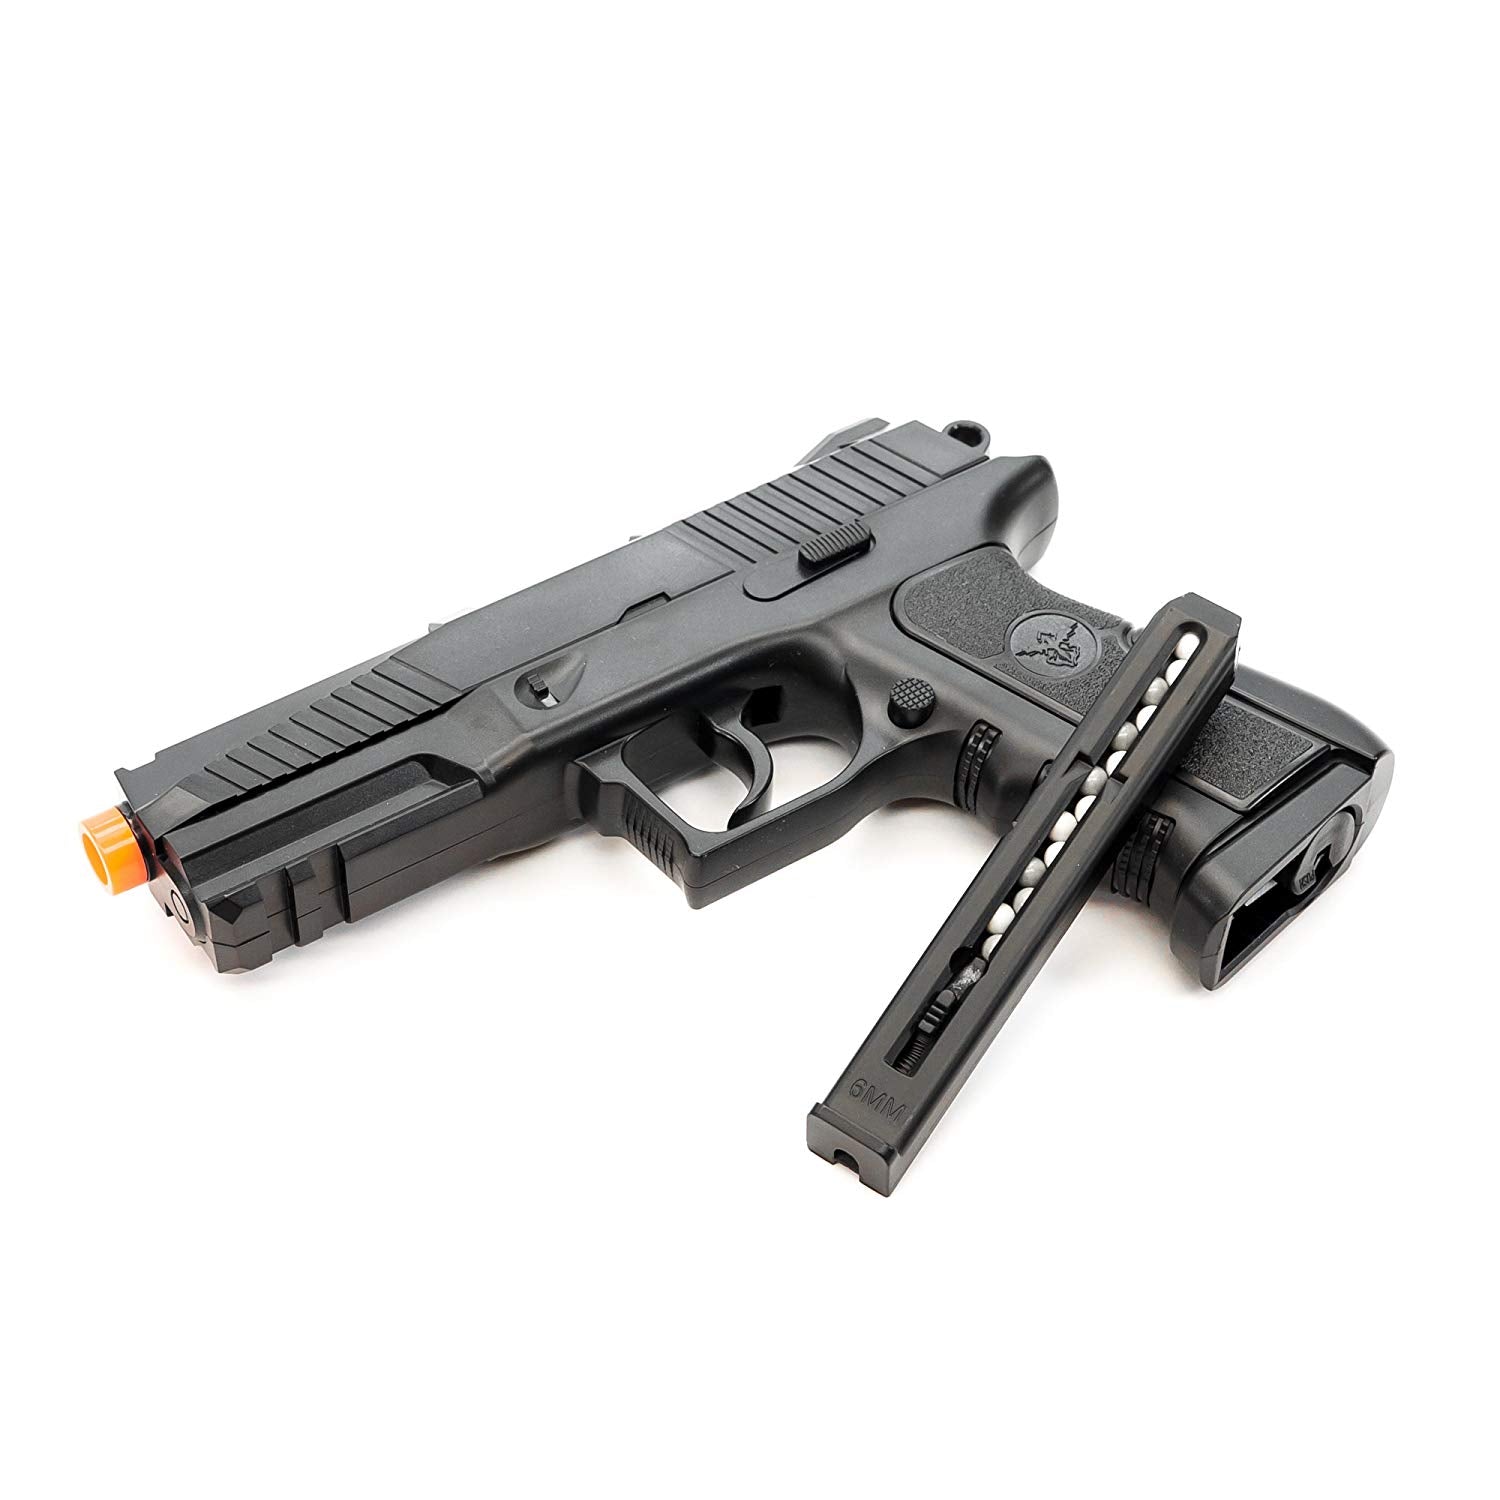 BR45 Airsoft Pistol - C02 Powered Airsoft BB Pistol - Black Ops USA